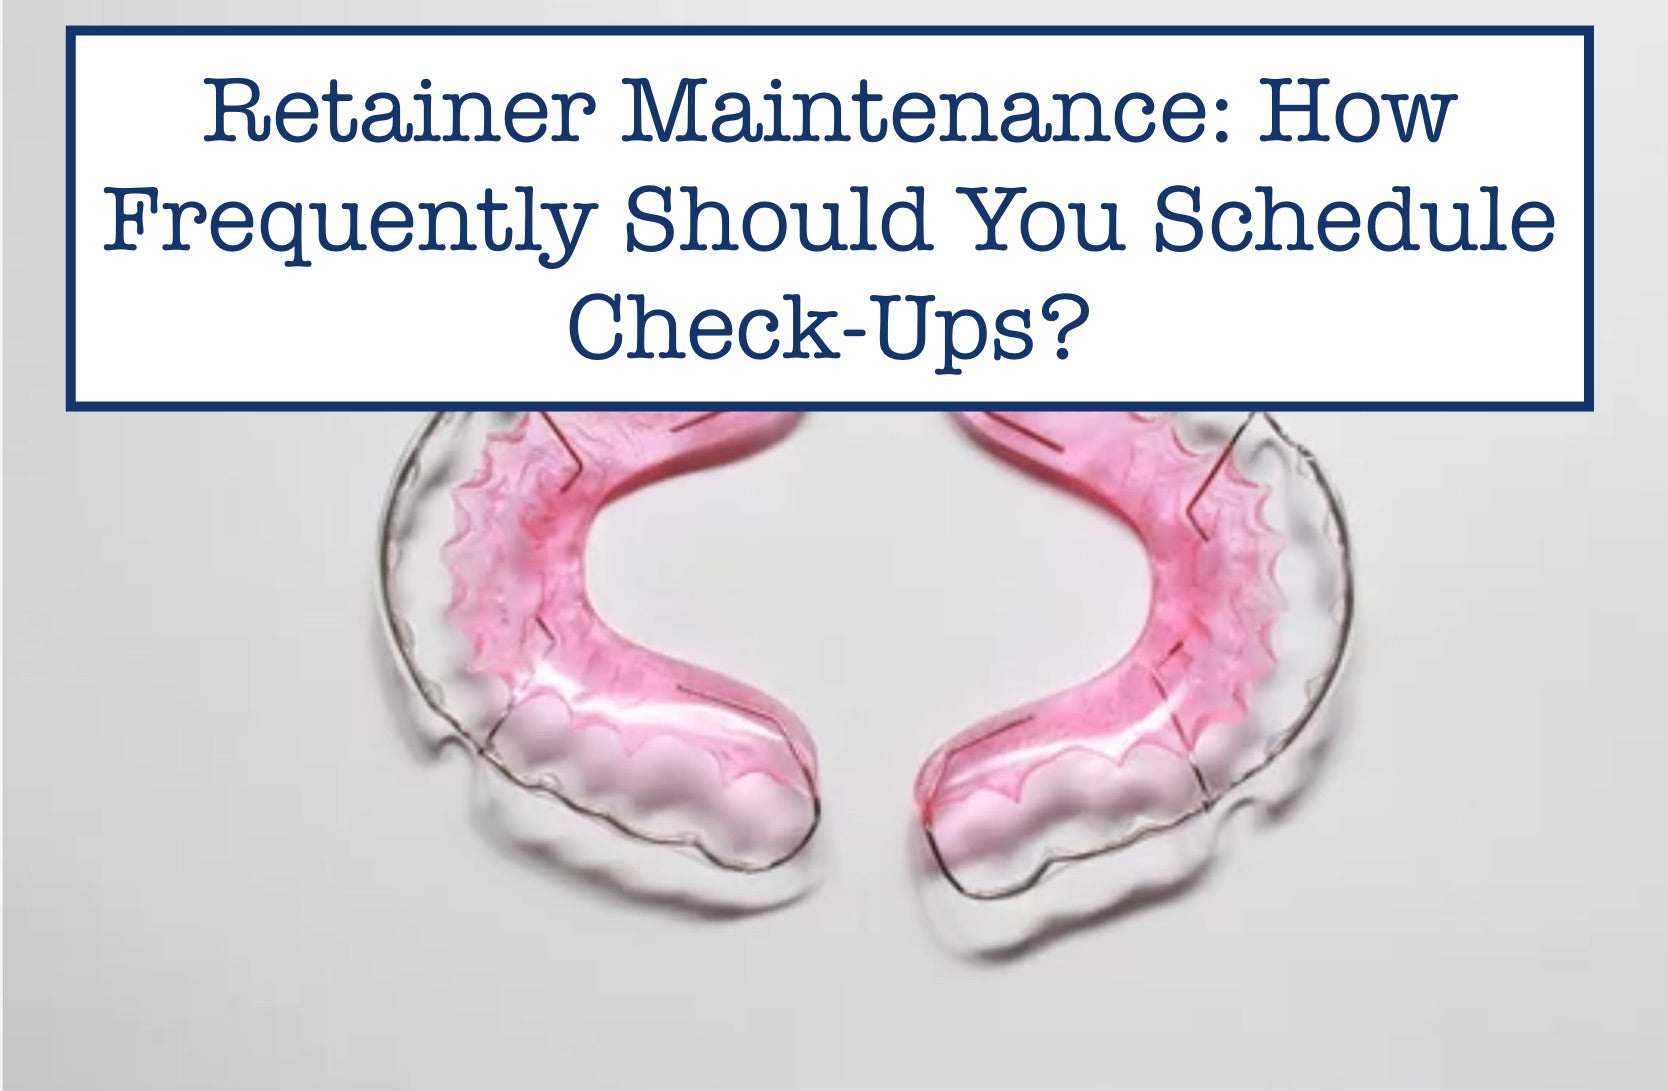 Retainer Maintenance: How Frequently Should You Schedule Check-Ups?